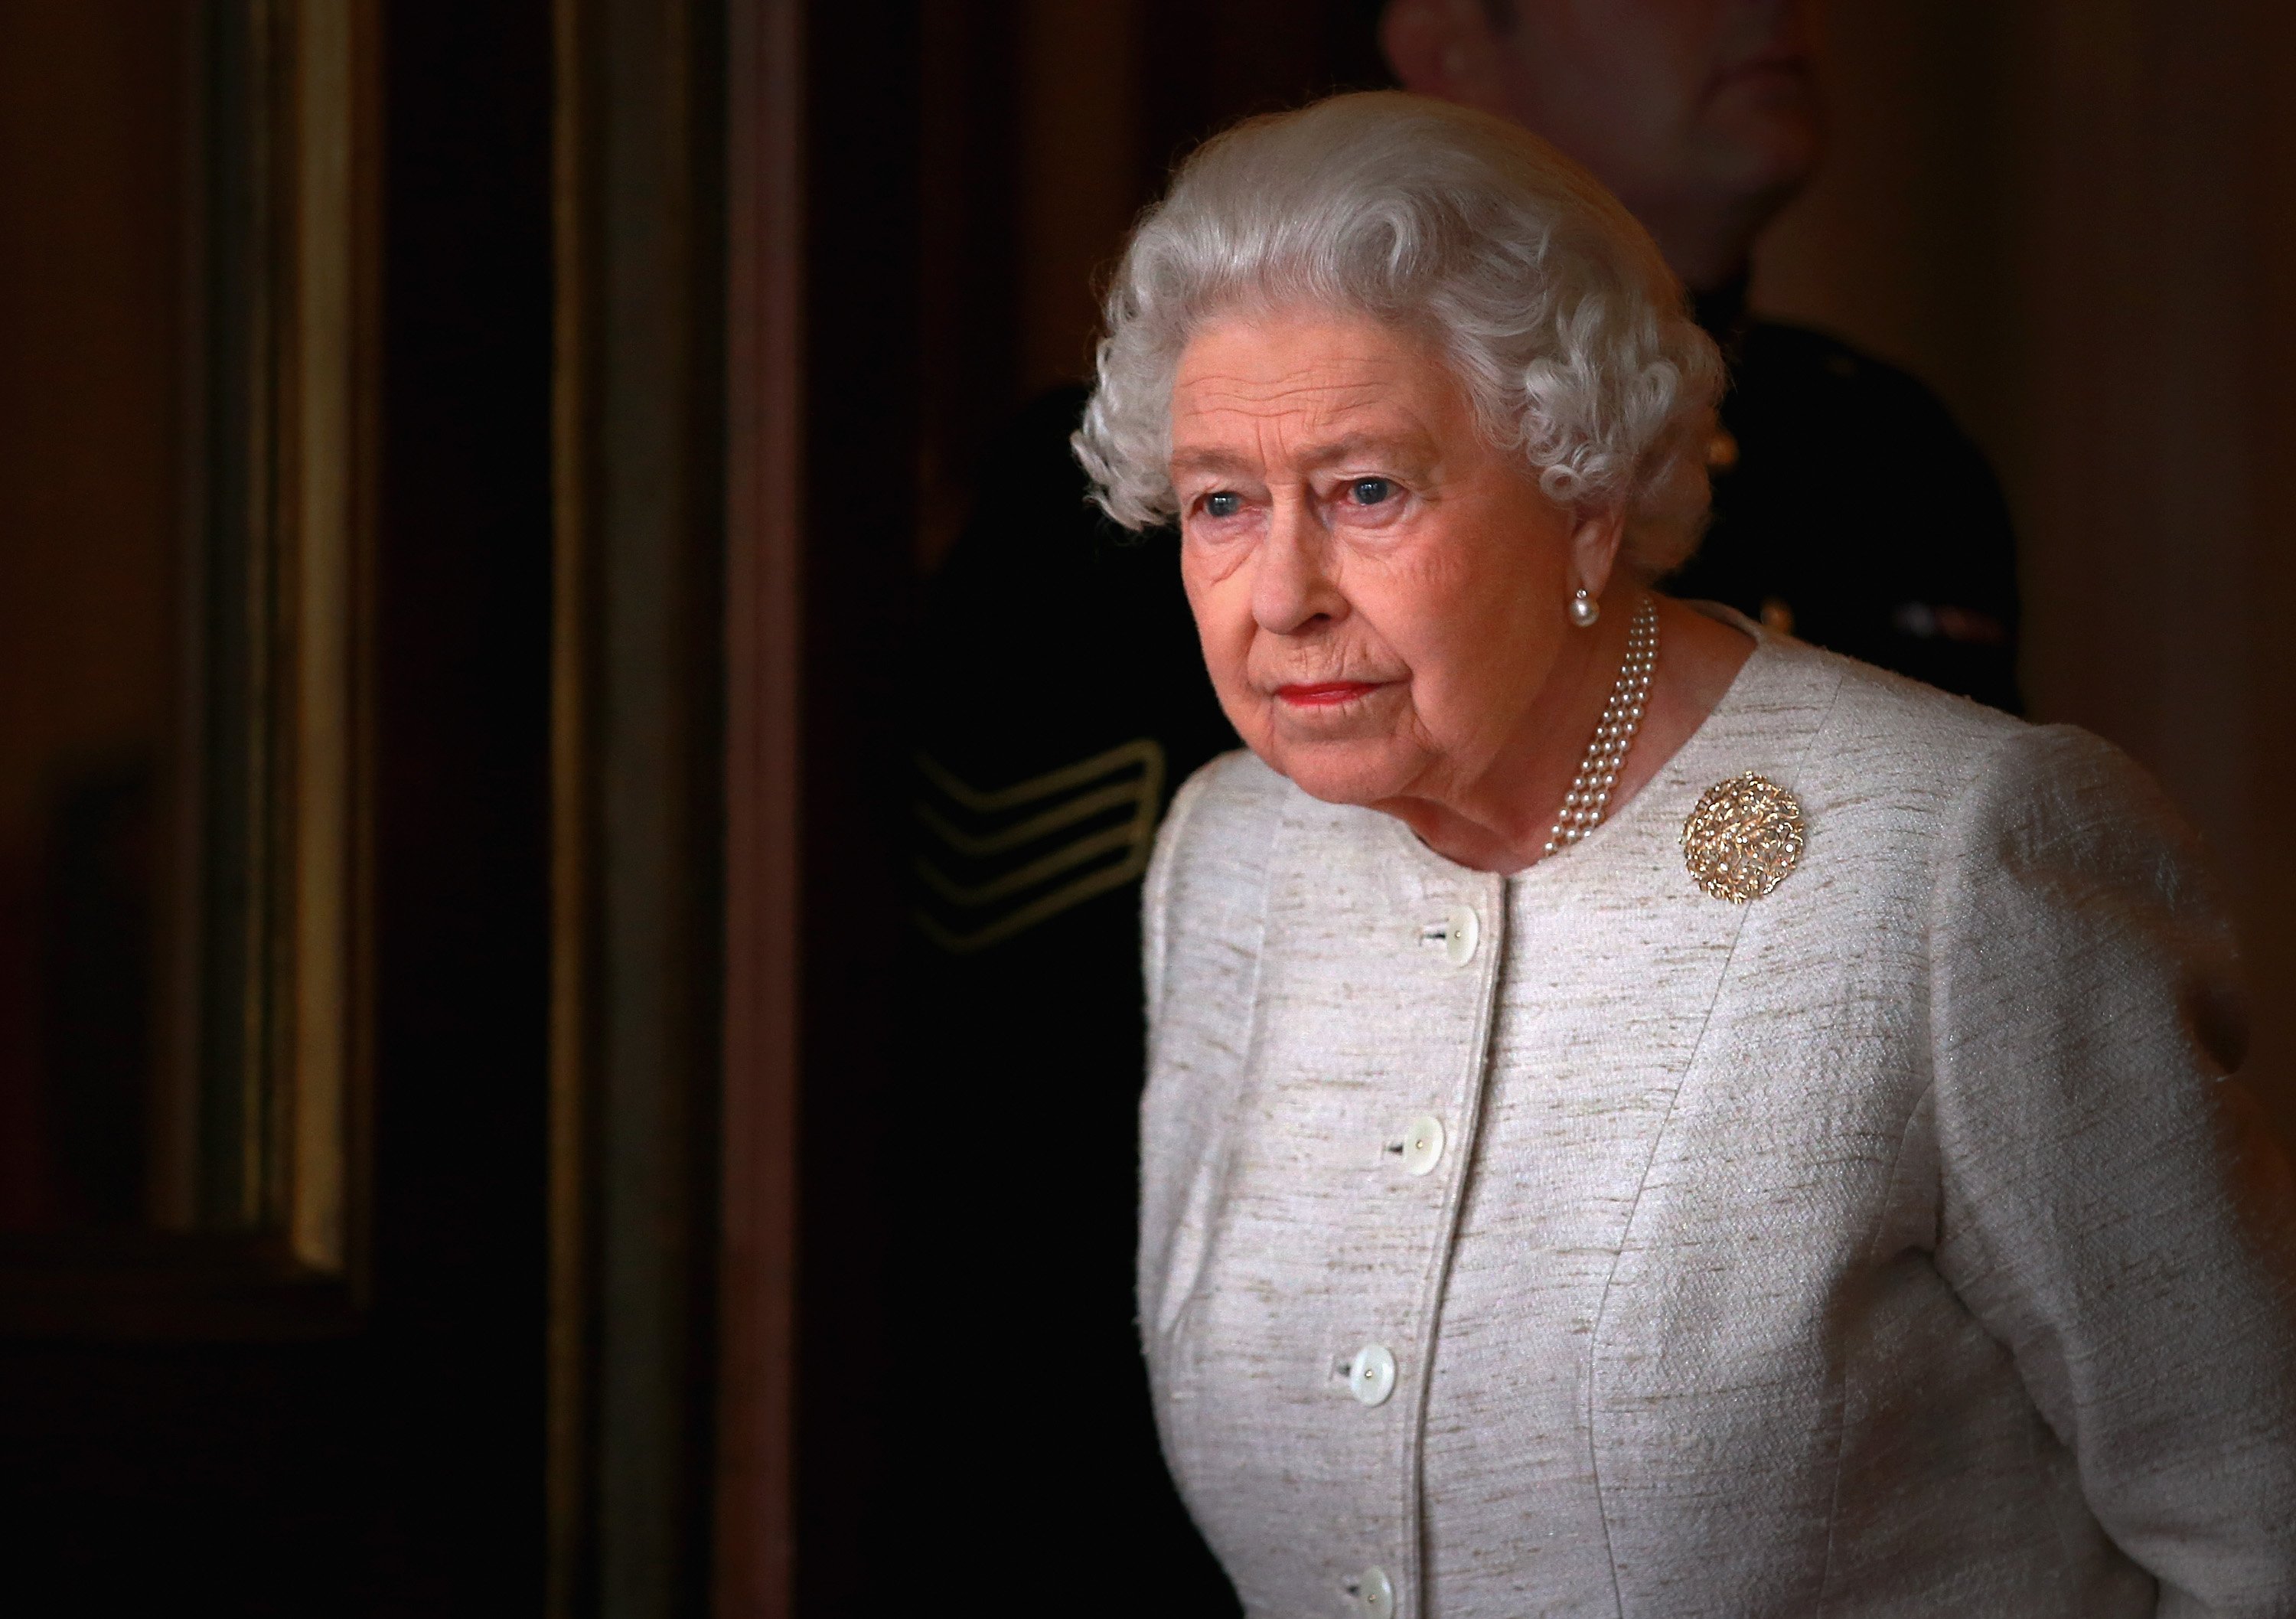 Queen Elizabeth II pictured at Buckingham Palace on November 4, 2015 in London, England | Source: Getty Images